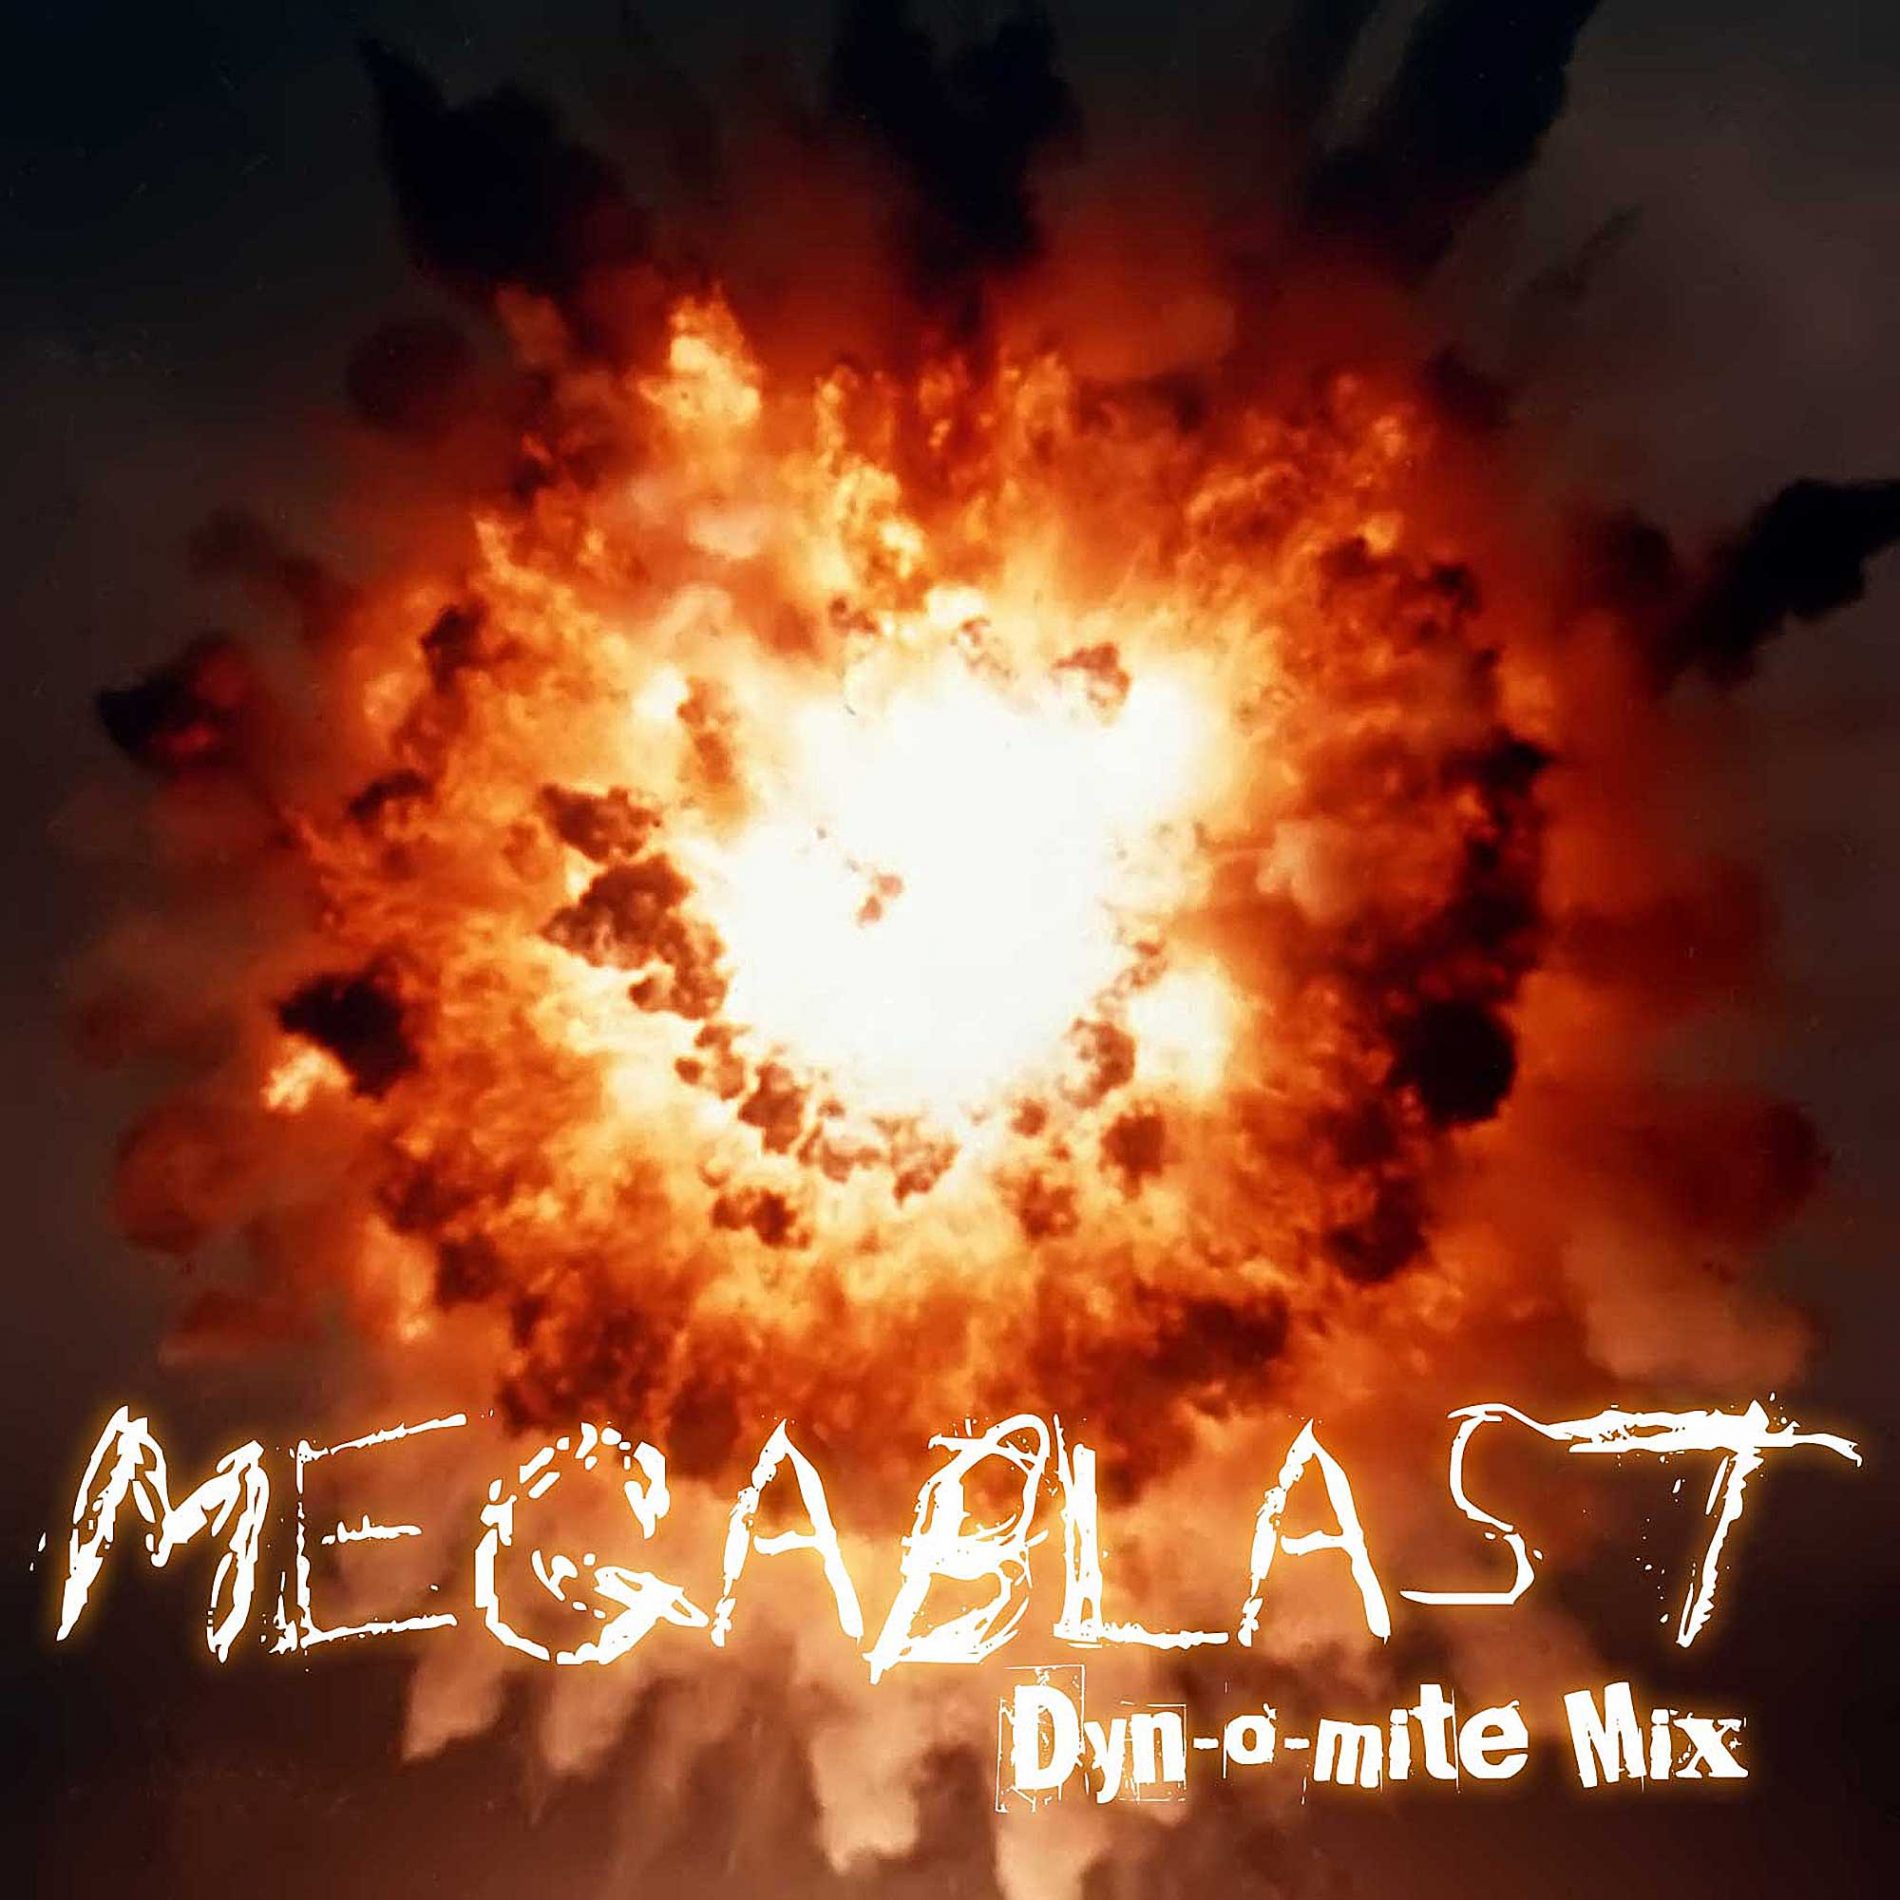 After the original release, the extended mix, the Space Trace Mix, here comes the Megablast (Dyn-o-mite Mix).